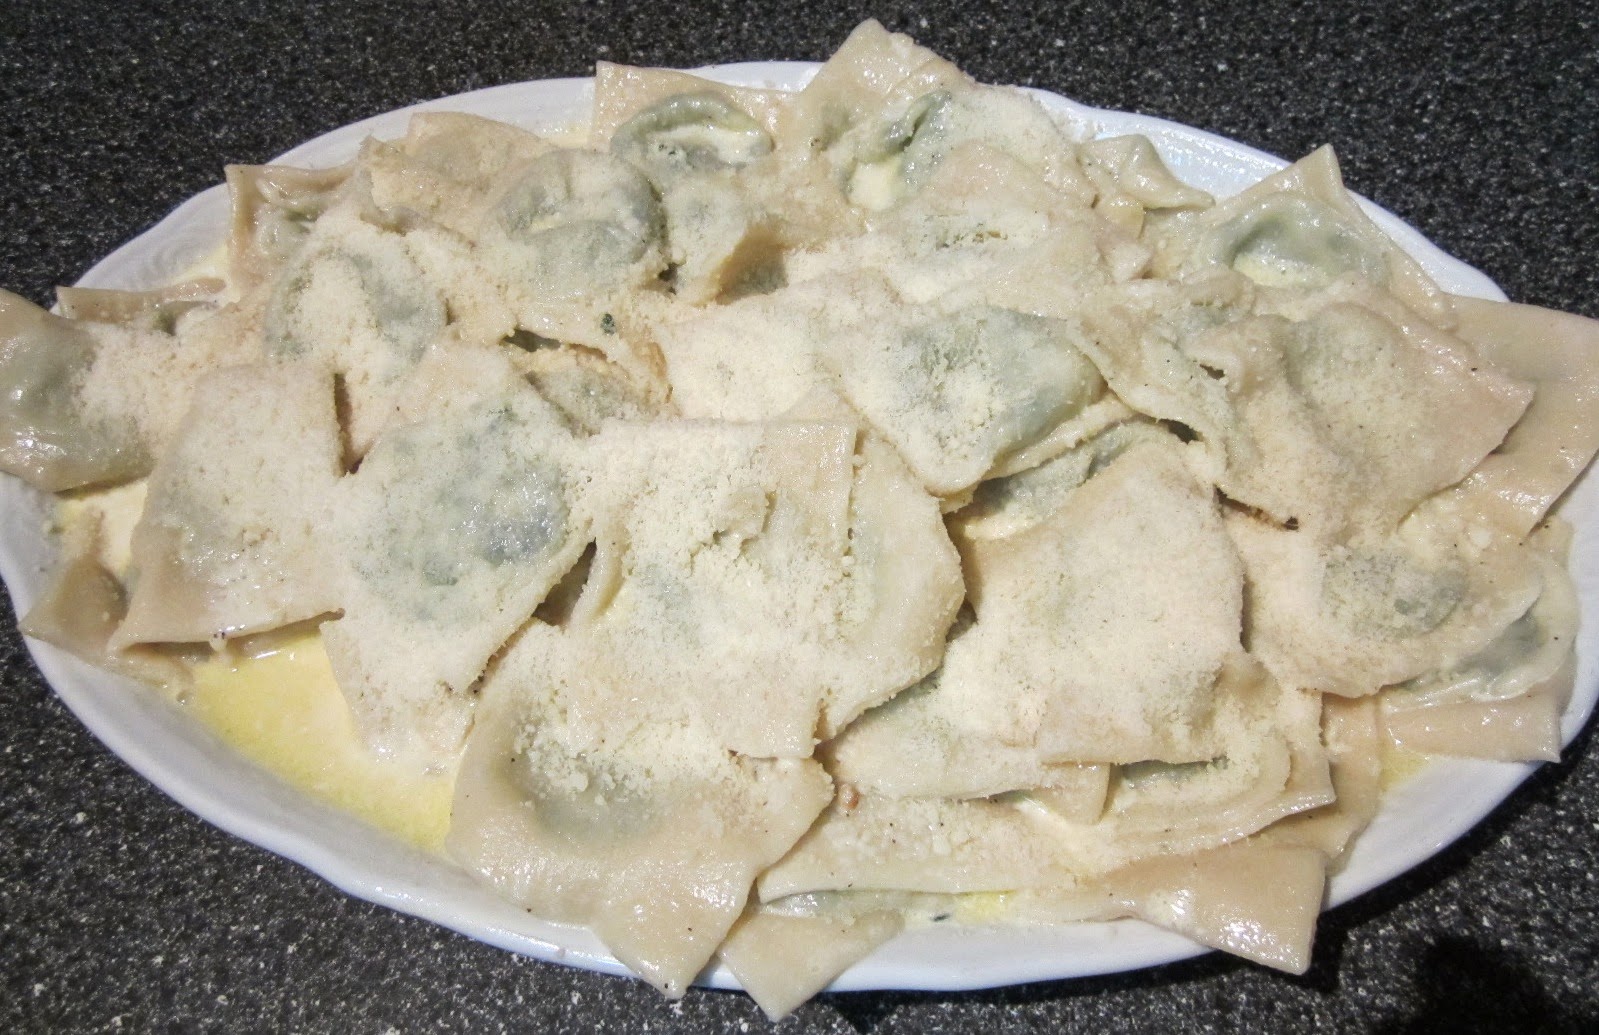 Food Lust People Love: Homemade spinach and cheese ravioli do take a little time but making your own pasta dough is right up there on the satisfaction scale with baking bread. You know what’s in it. It’s fresh and the taste is far superior to store-bought. Best of all, it’s surprisingly easy.